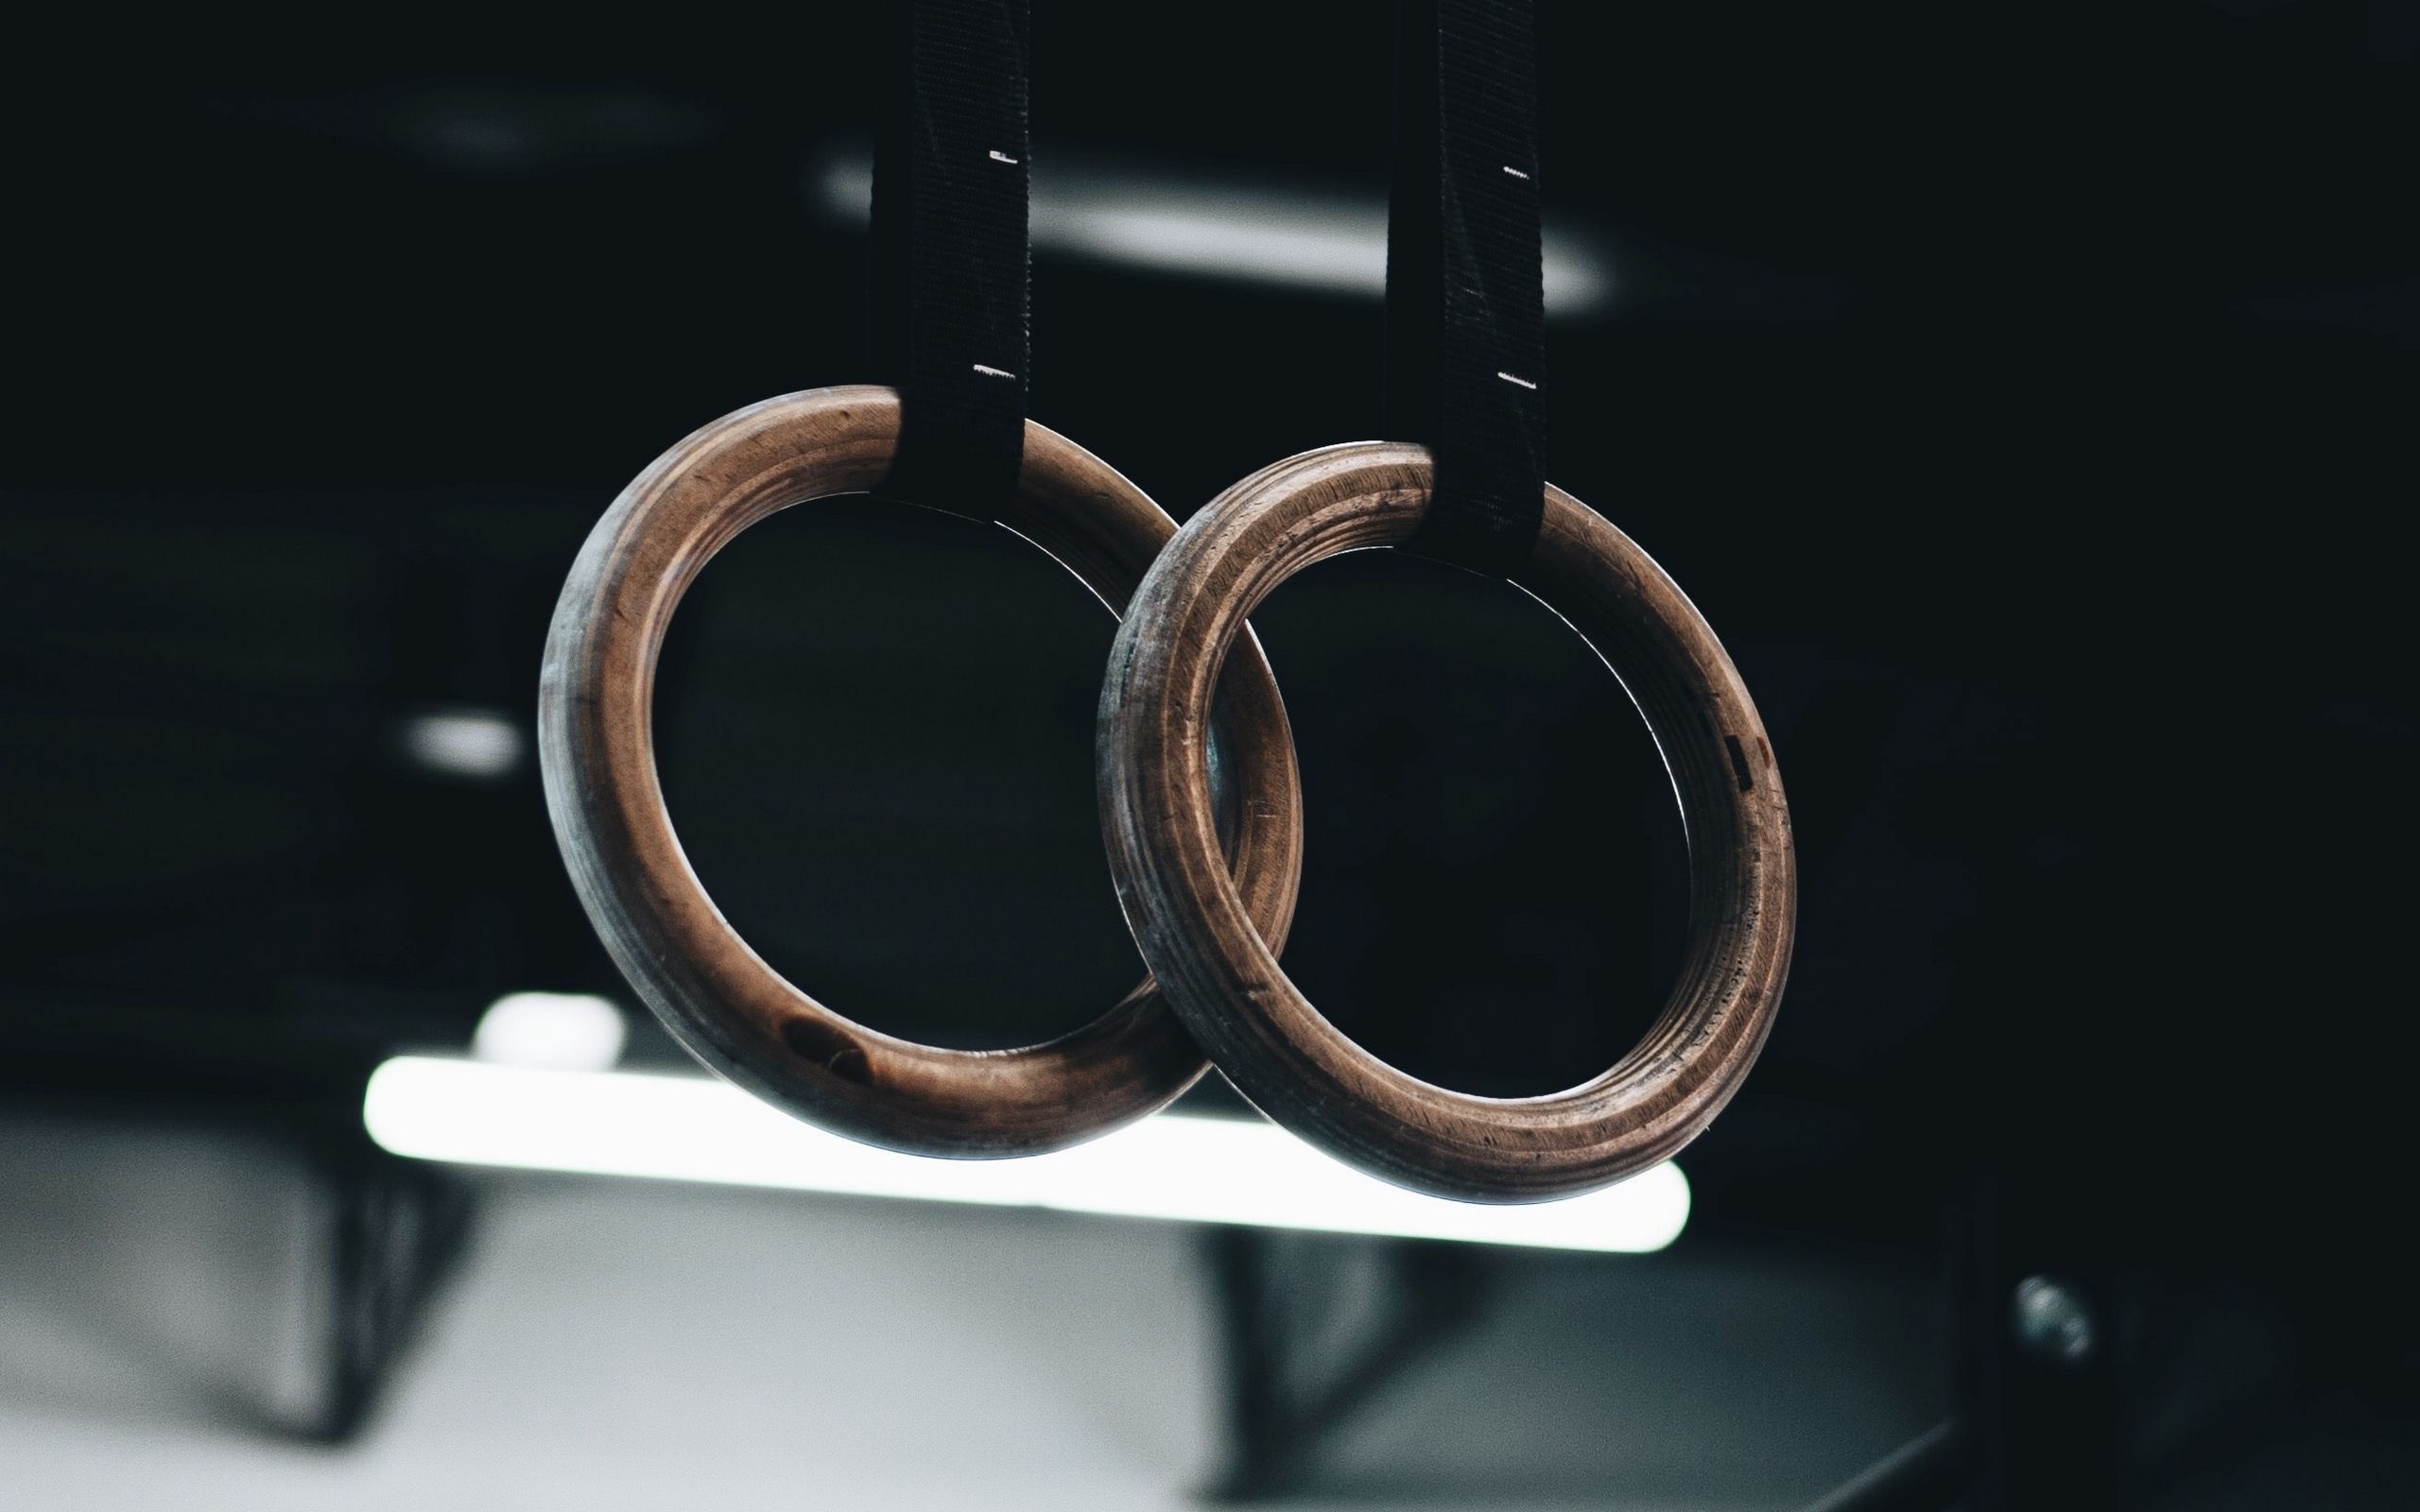 Rings (Gymnastics): Gym equipment, AG apparatus, Ring supported by a strap. 2560x1600 HD Wallpaper.